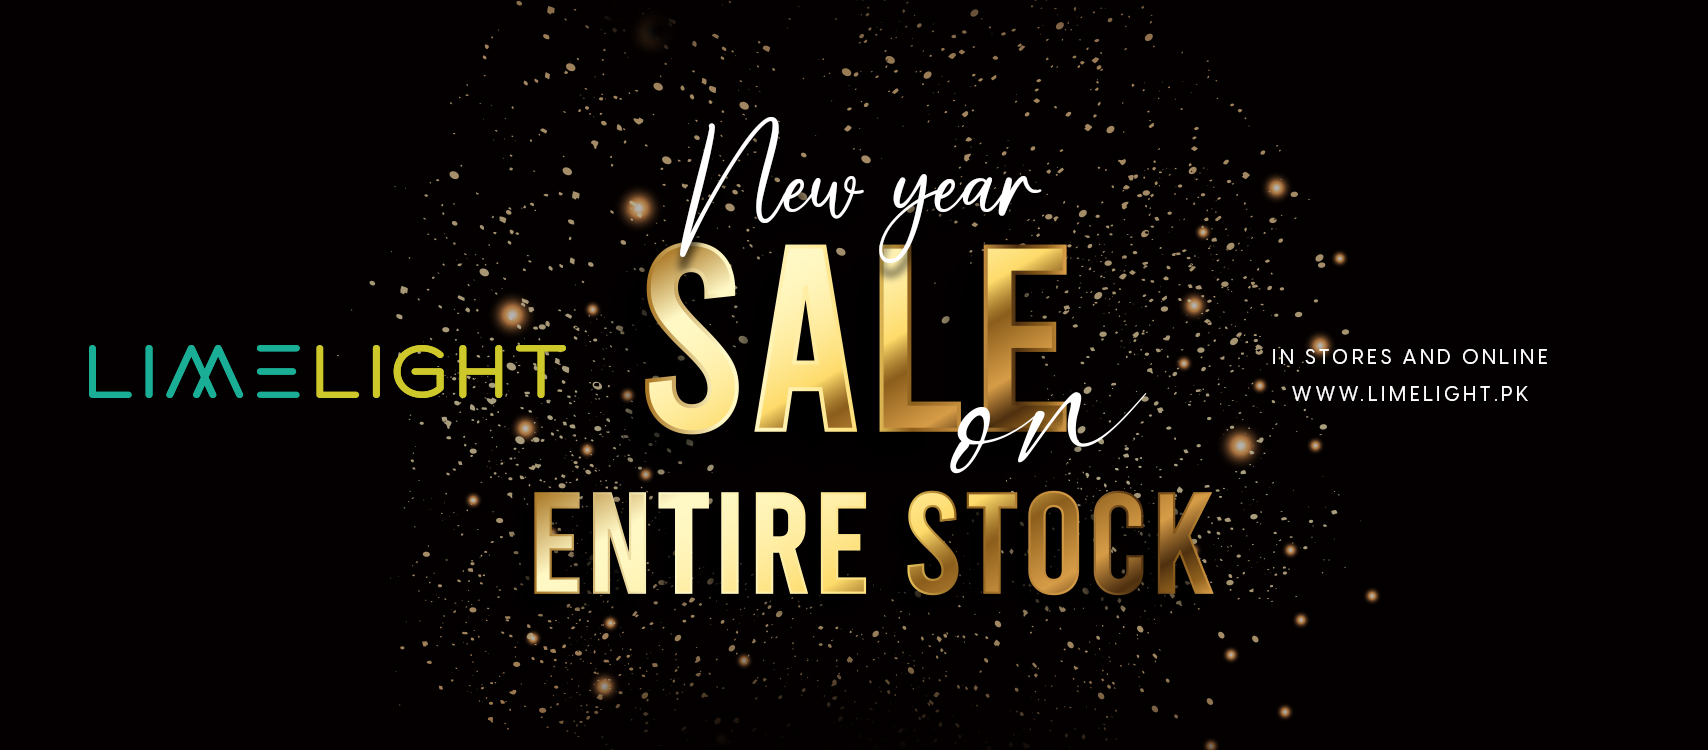 Limelight new year sale